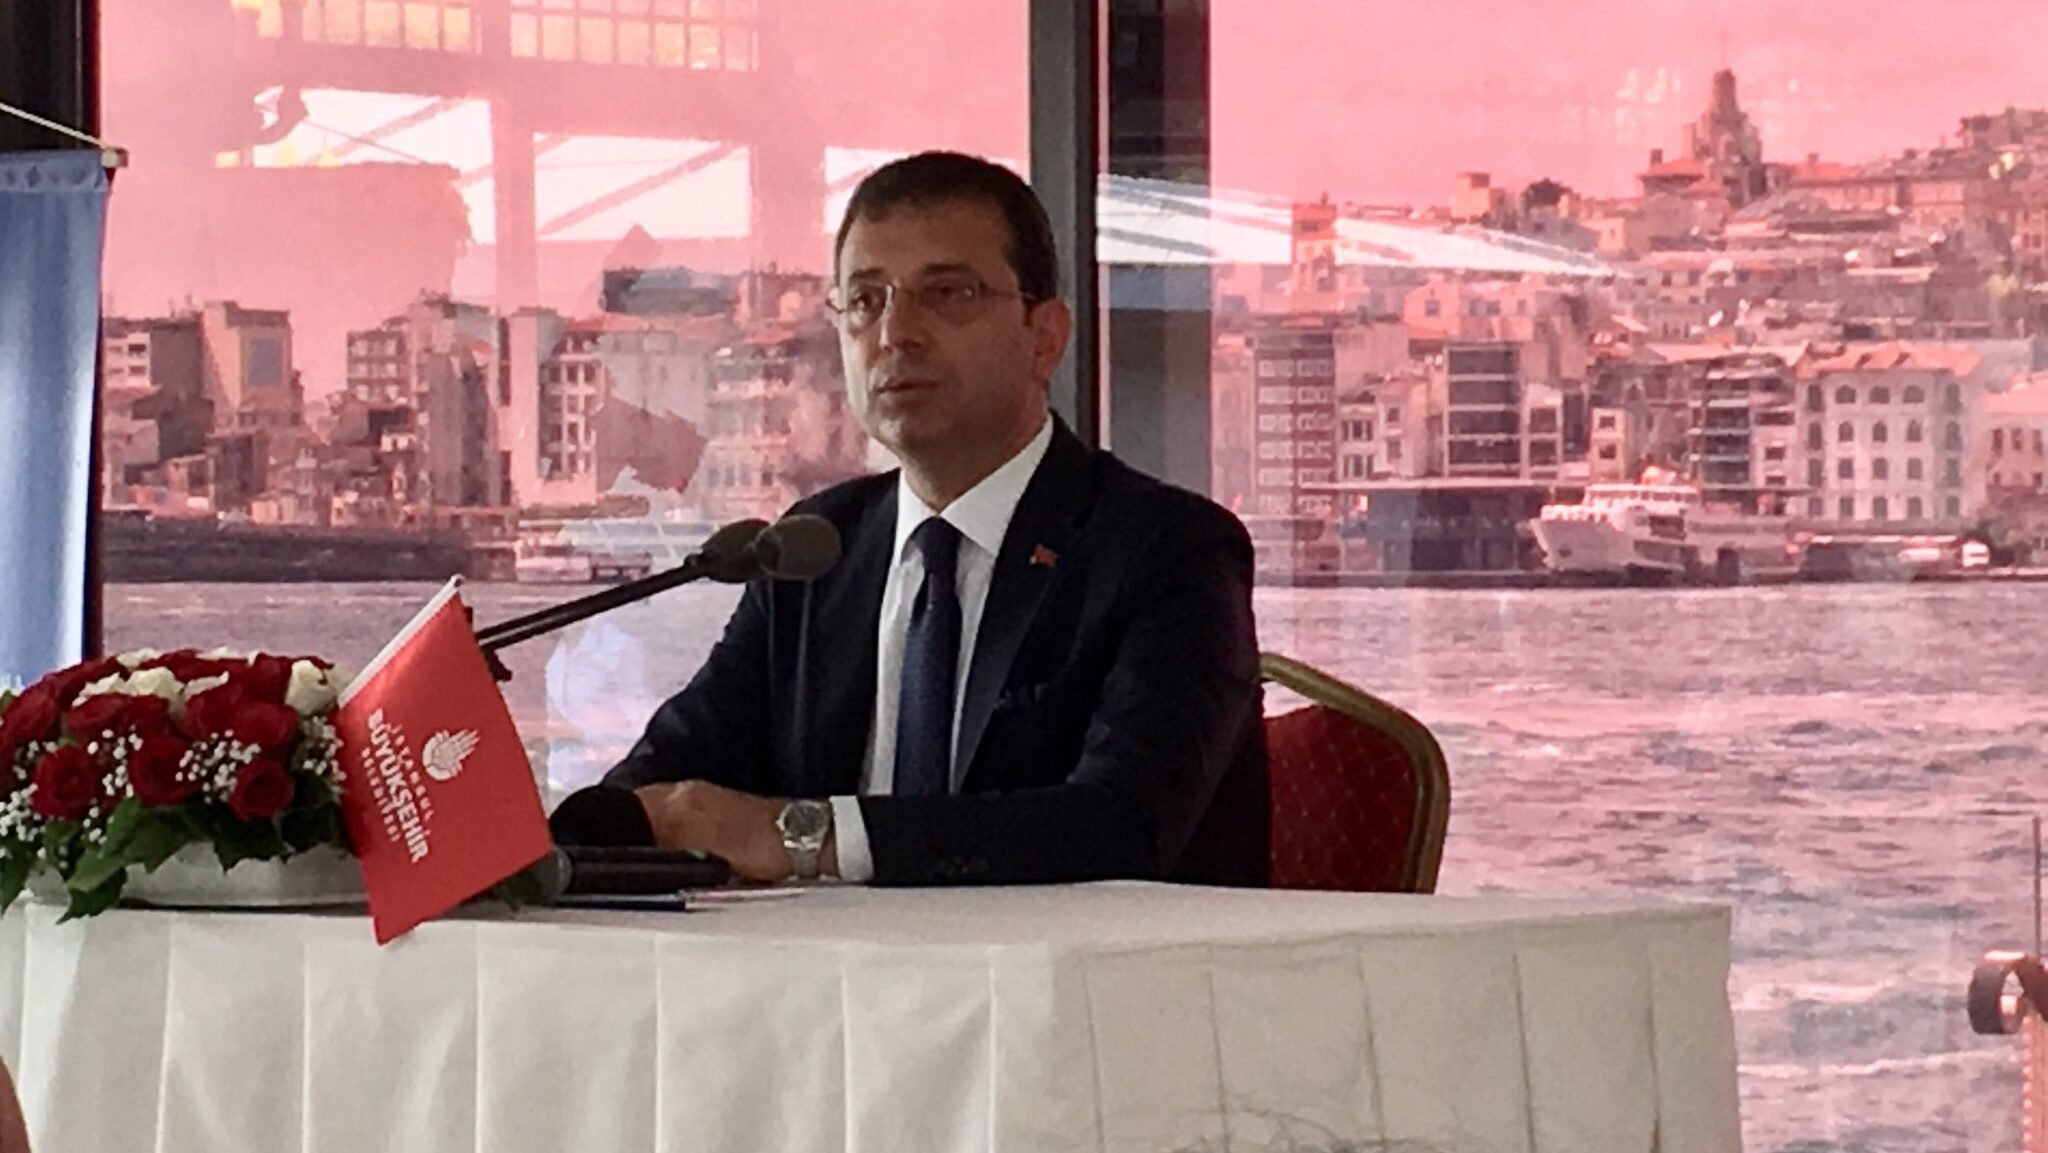 Battle for Istanbul: Mayor Imamoglu Seeks To Upend Erdogan’s Hold in Pivotal Local Vote